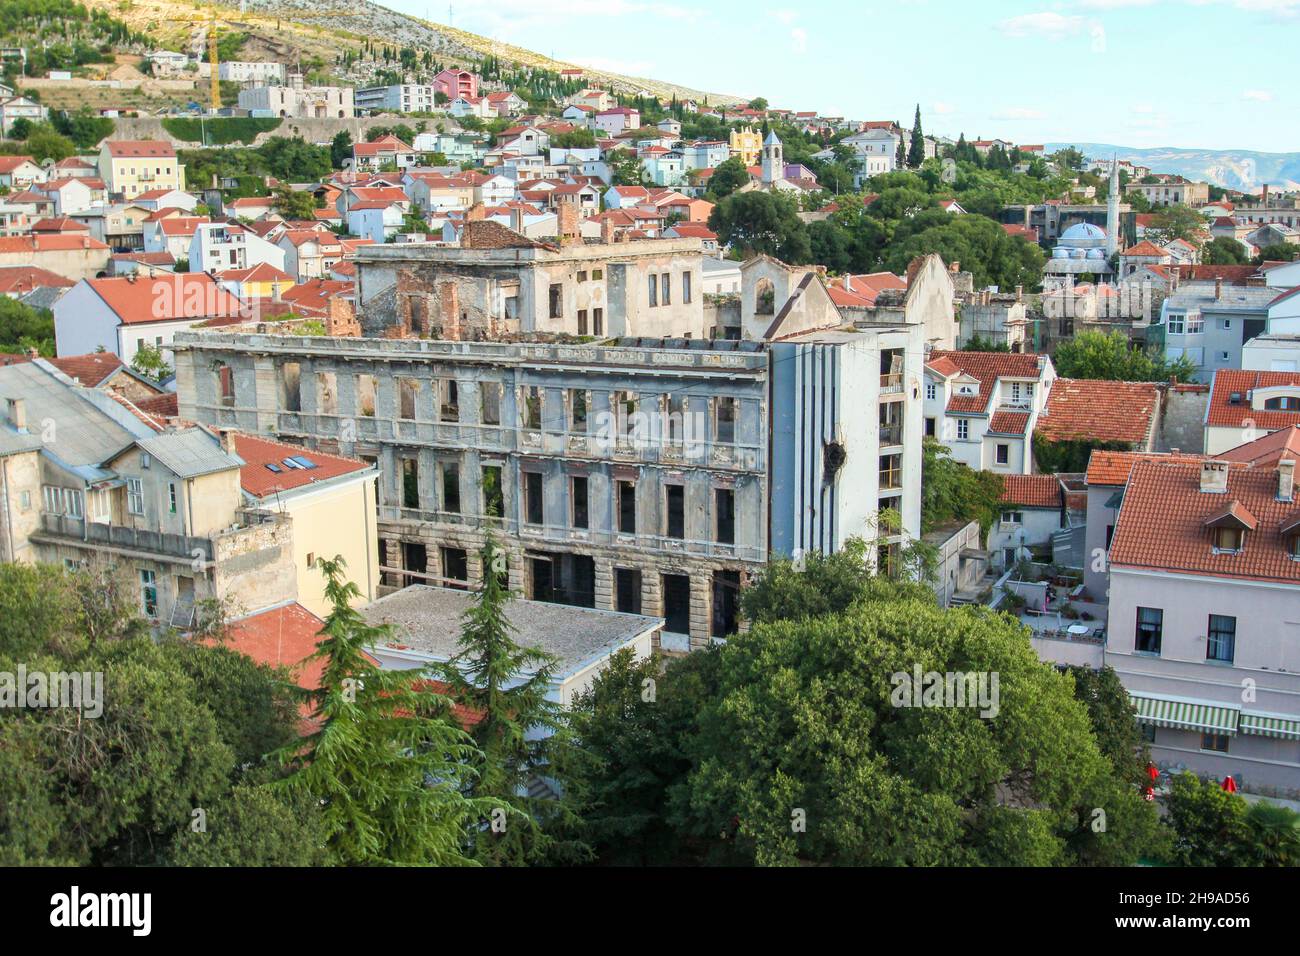 Old destroyed building in downtown Mostar after Yugoslavian war, Bosnia and Herzegovina Stock Photo